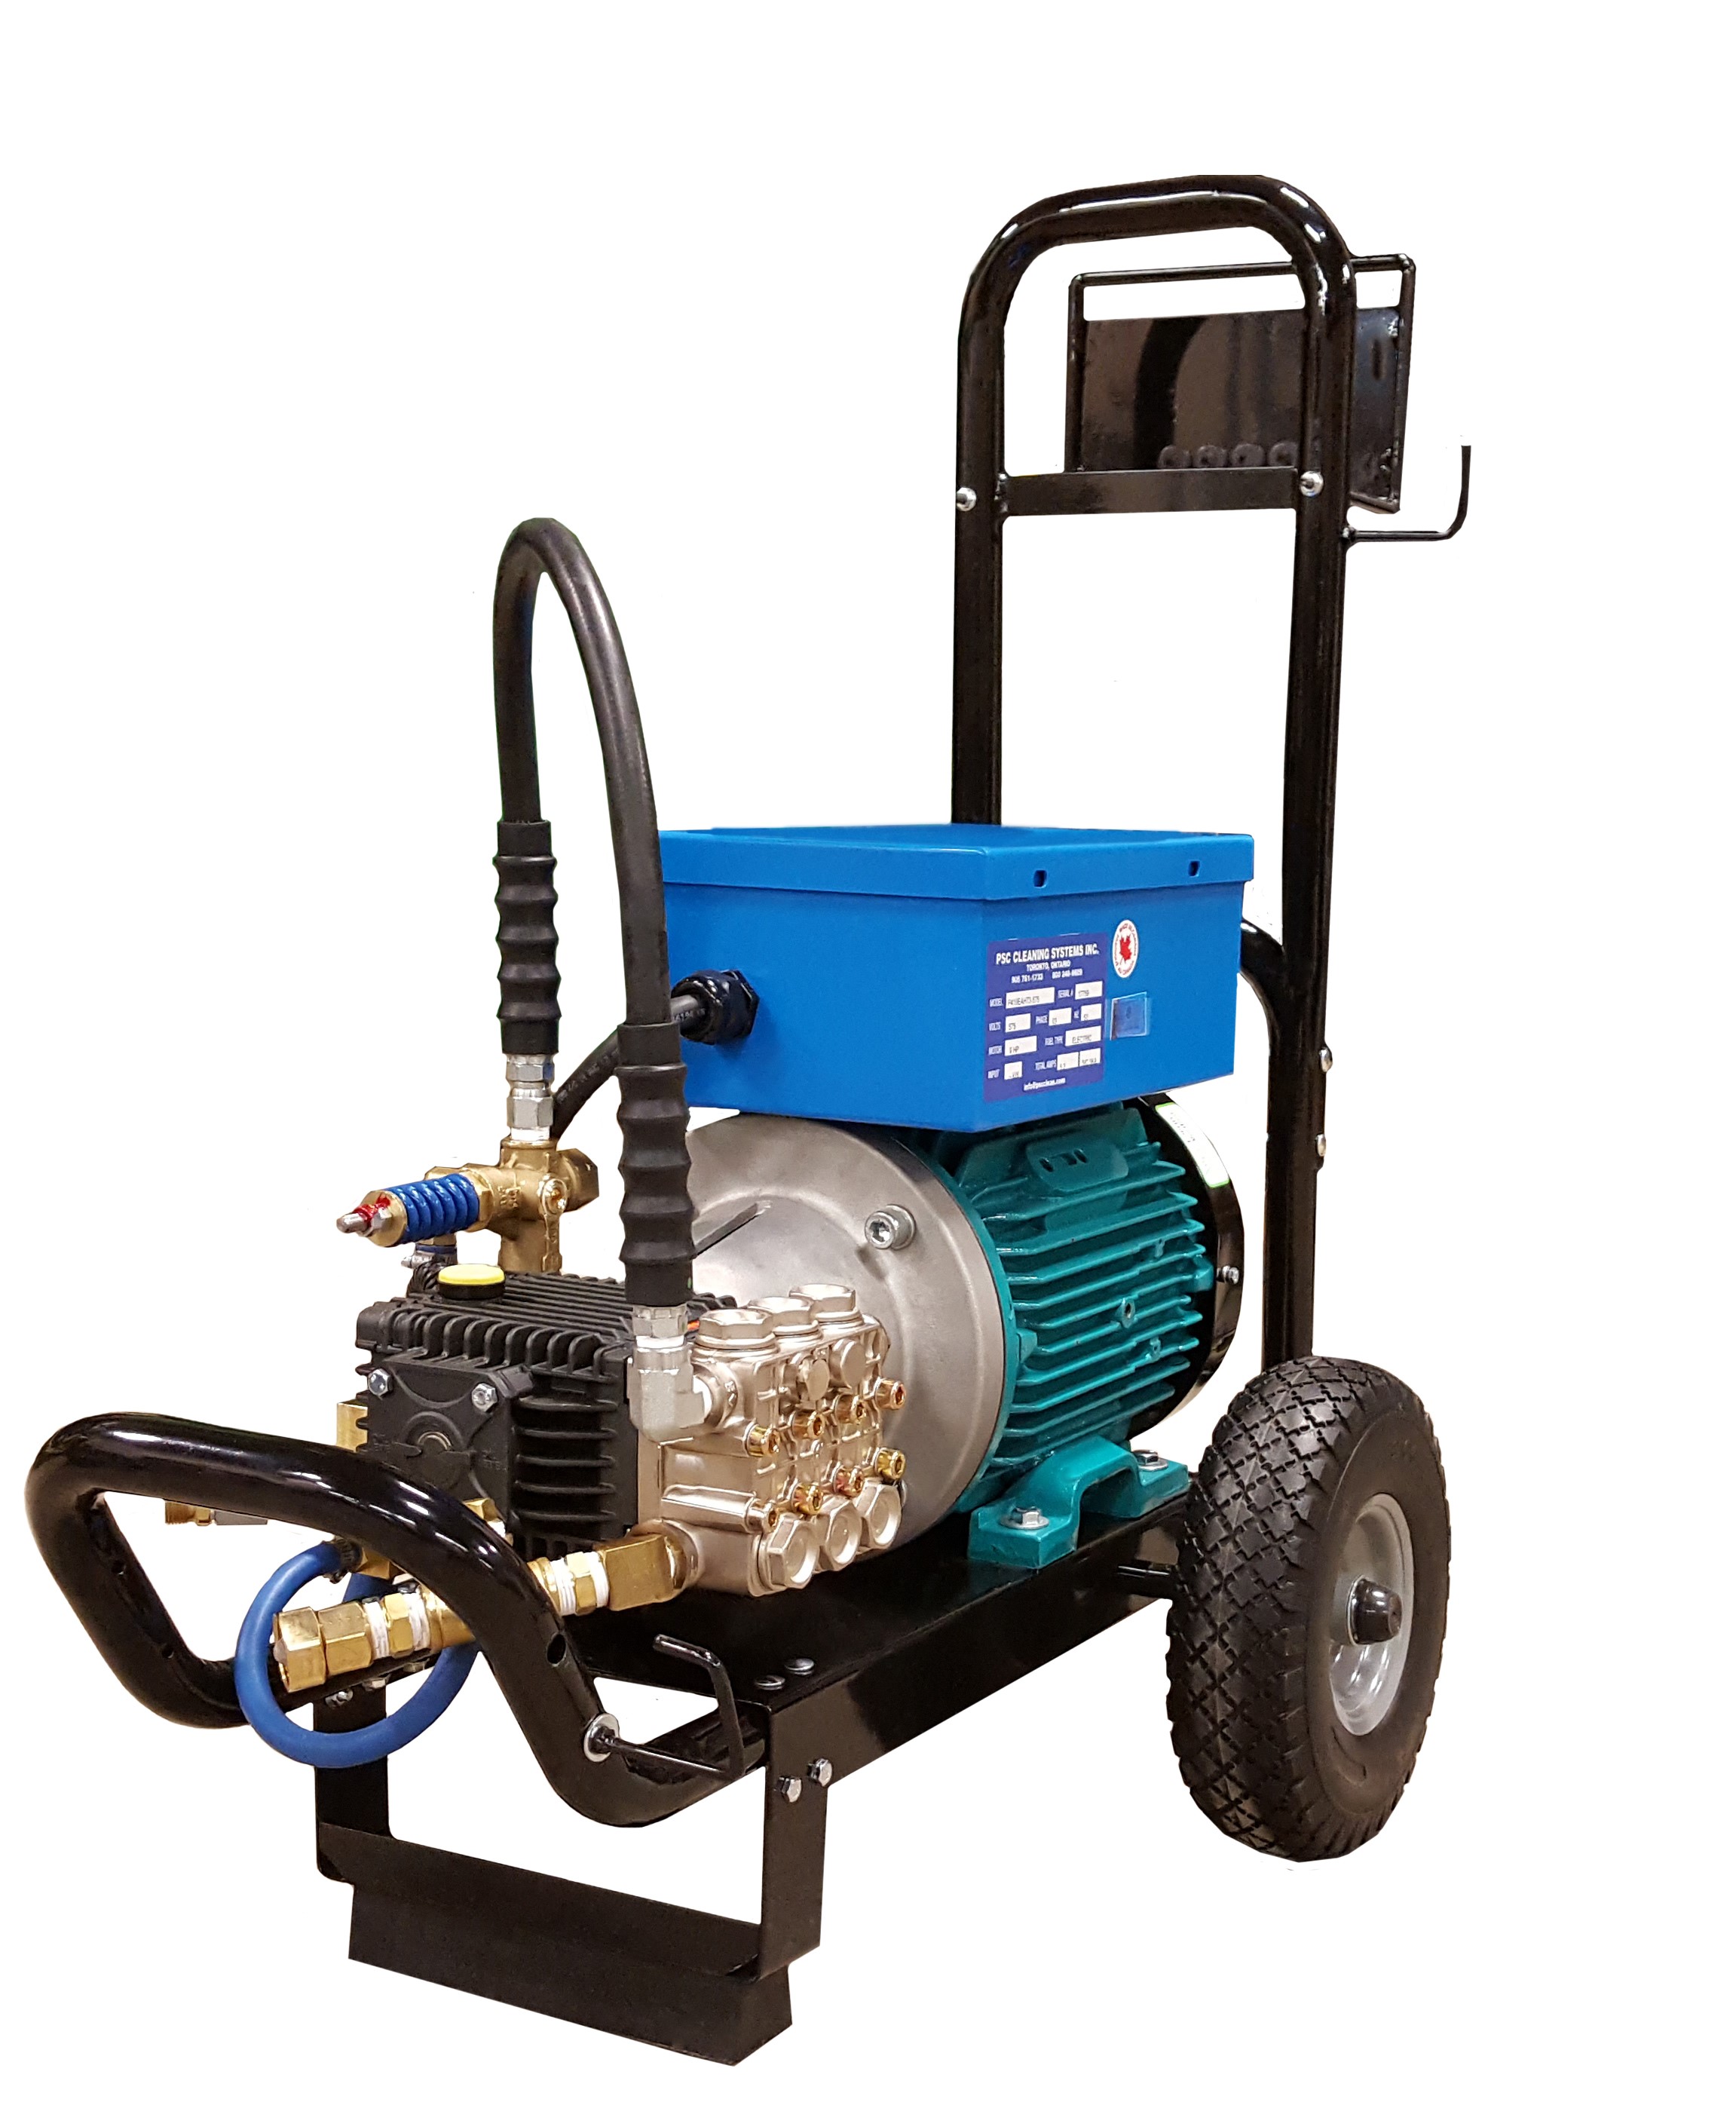 P419EAHT1-230 – Rated 3.96 Gpm @ 1800 Psi. 5 Hp, 230 Volt, 1 Phase TEFC Motor With IP55 Rating (approx. 22 Amps). CSA Approved.